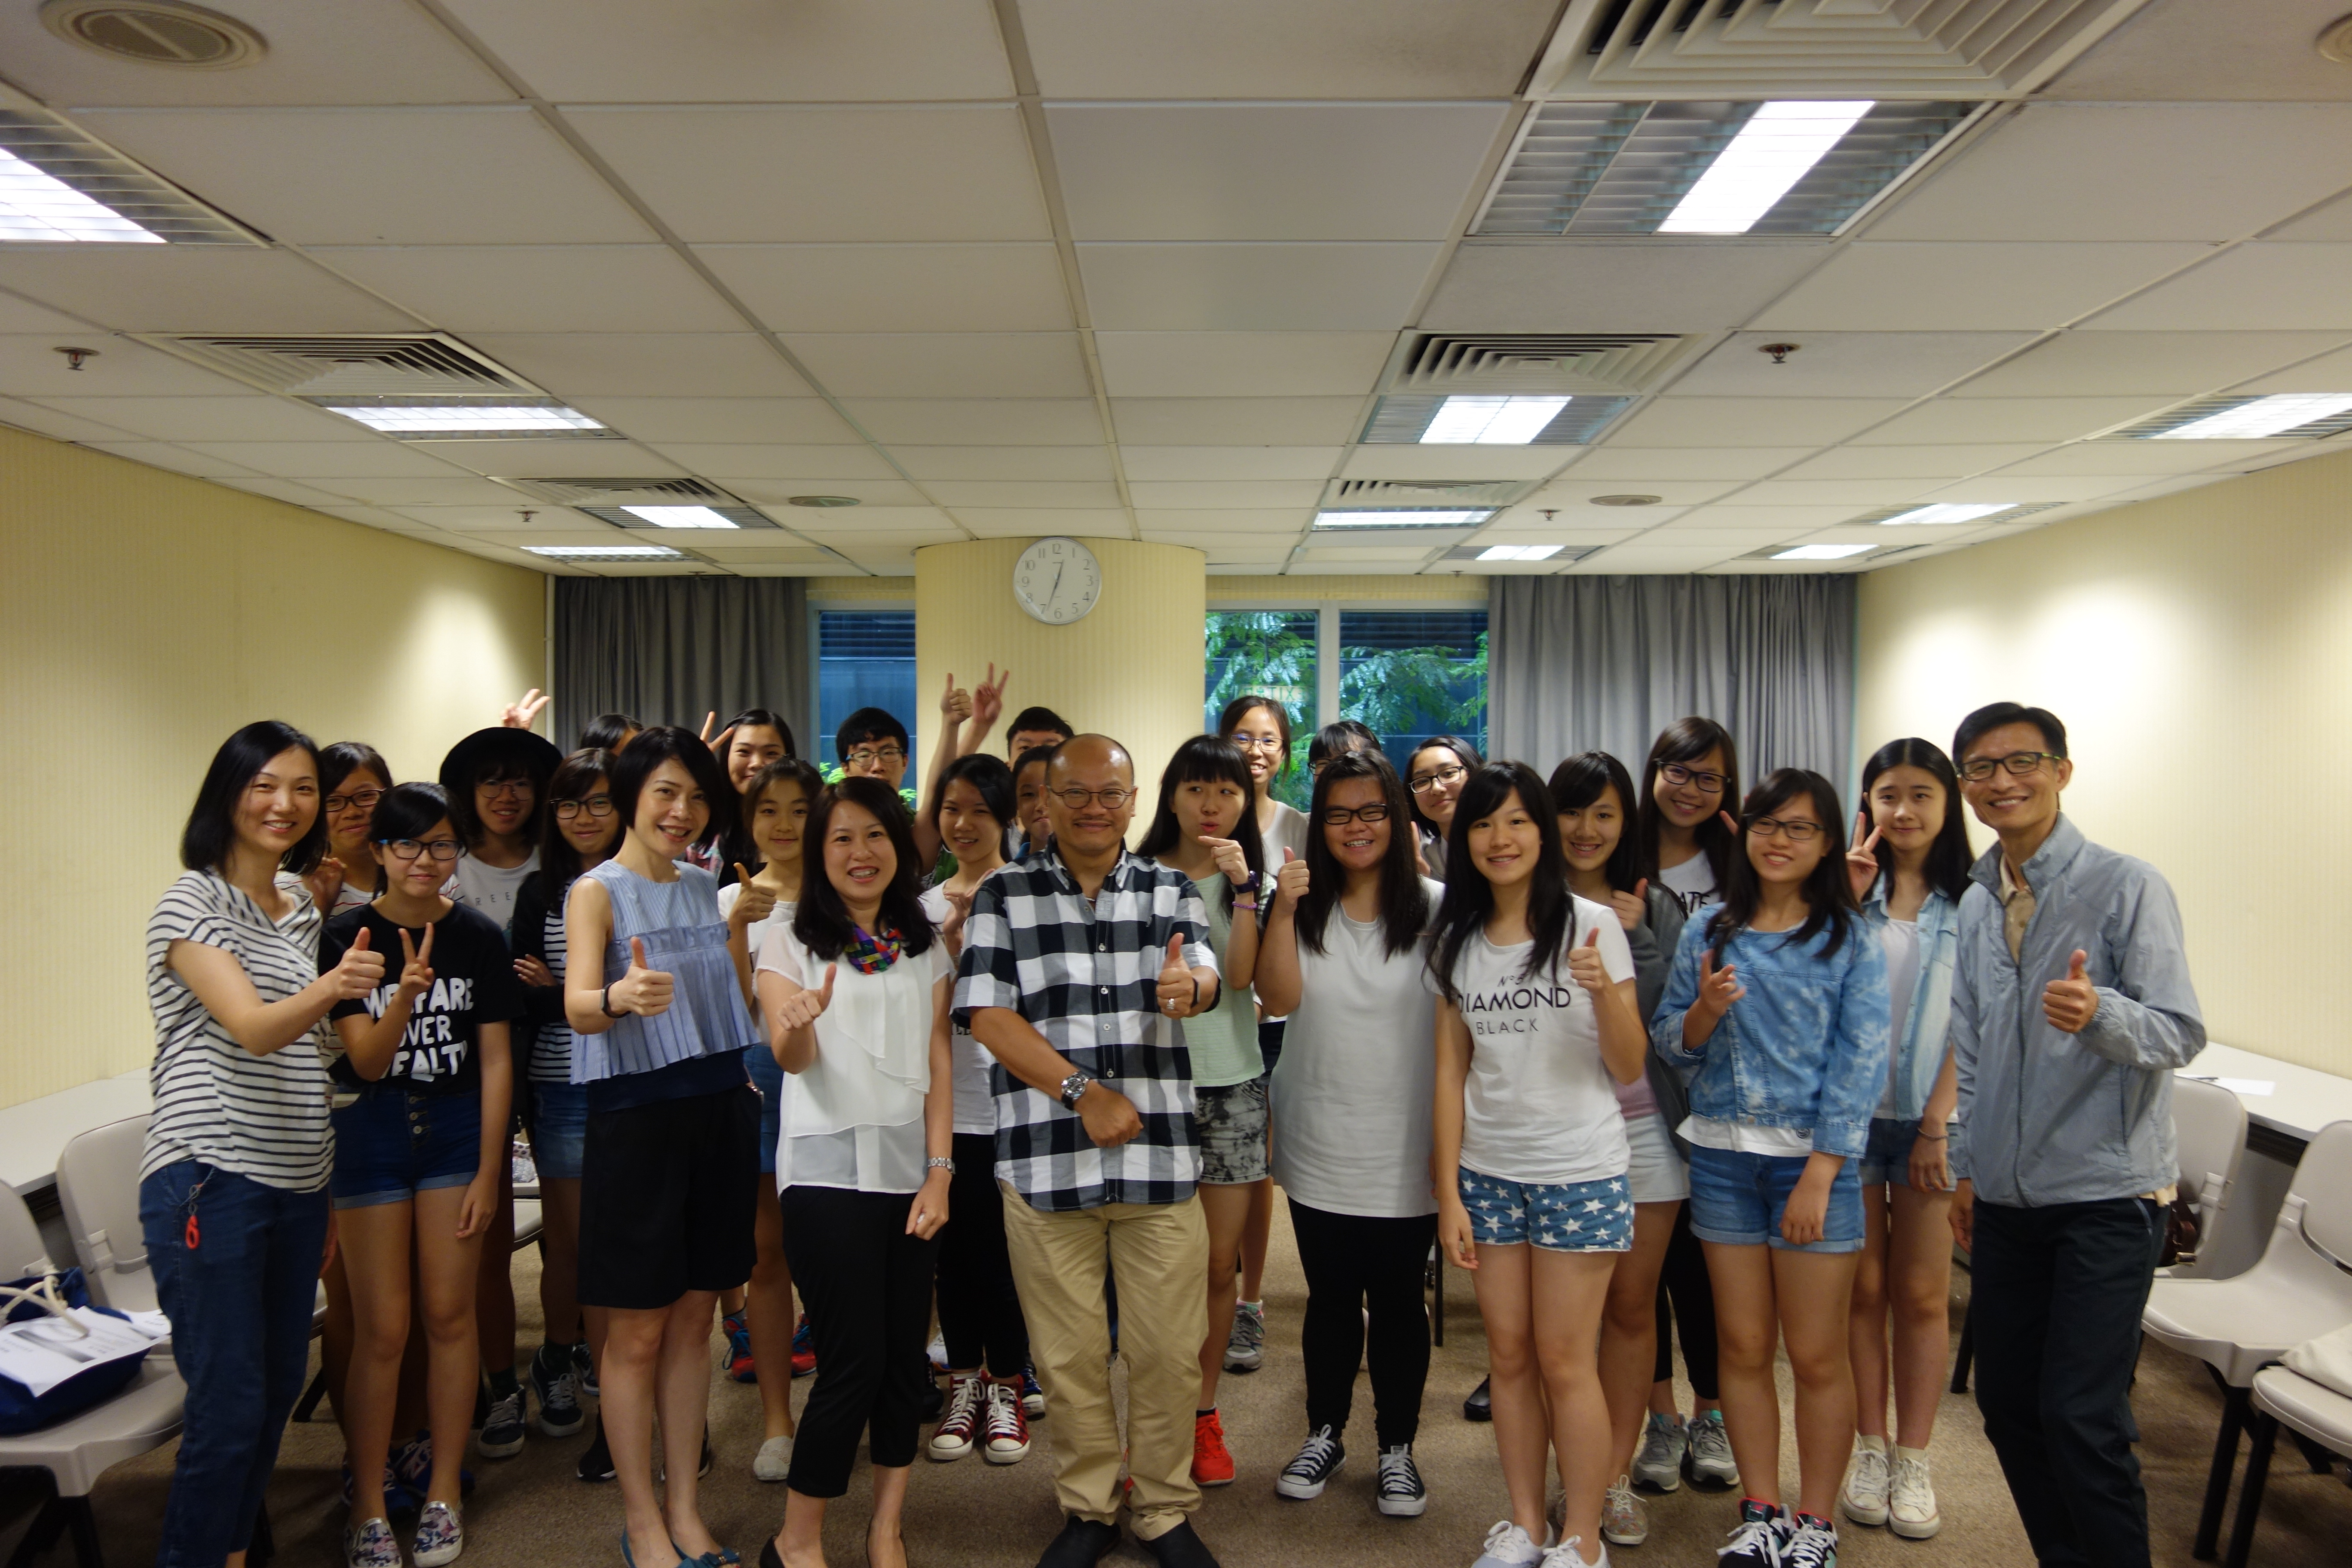 HKFI Community Project with the Hong Kong Federation of Youth Groups on Career Trial Workshop: Insurance Claims/Case Investigators